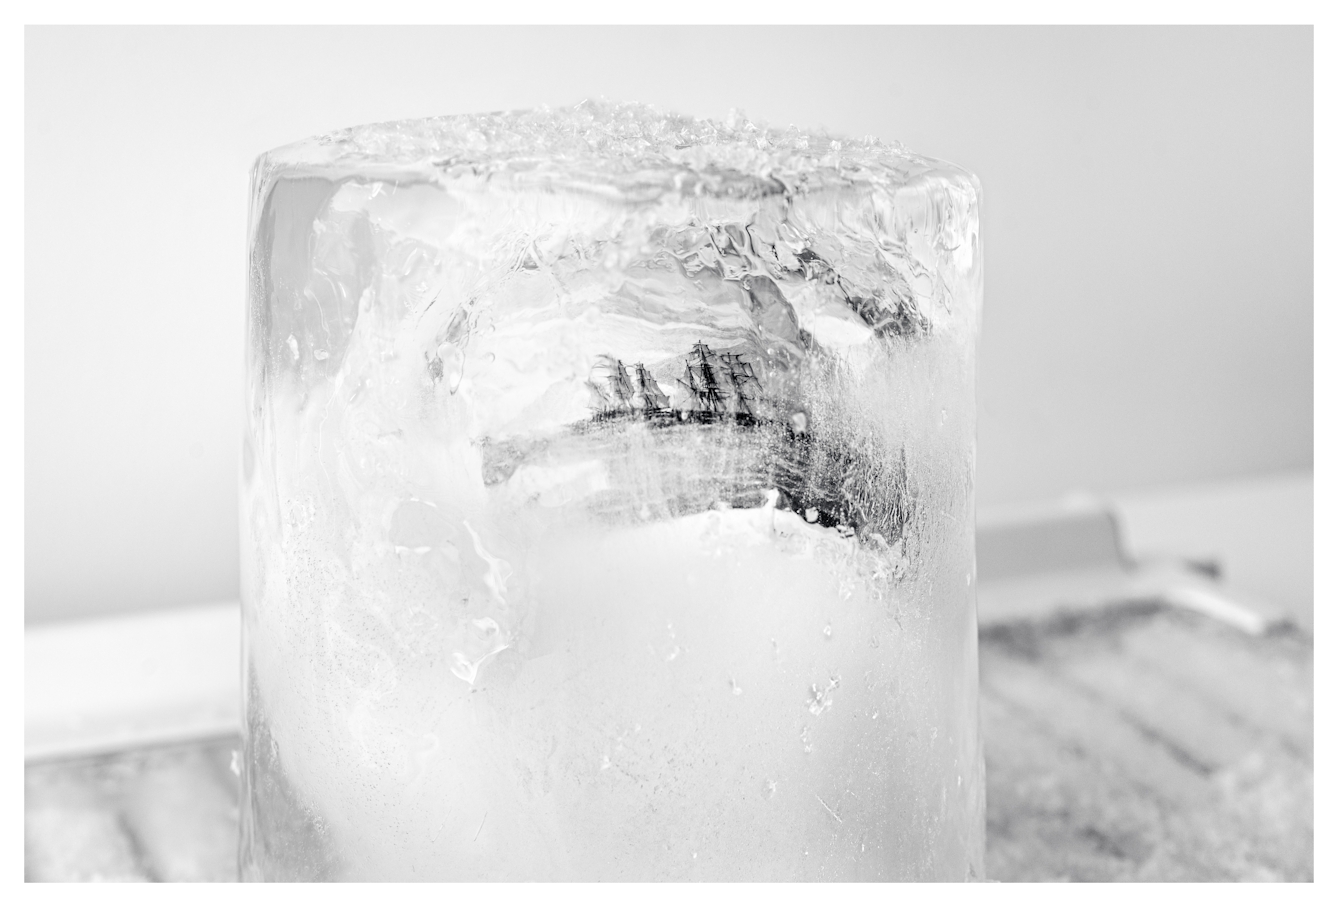 Monotone photograph showing a cylindrical core of frozen water. Encased within the ice is an illustration of tall sail ships from the 1800s that can just be seen through the distortions of the ice wall and opaque frosting. The ice core is standing vertically on a fridge freezer shelf.